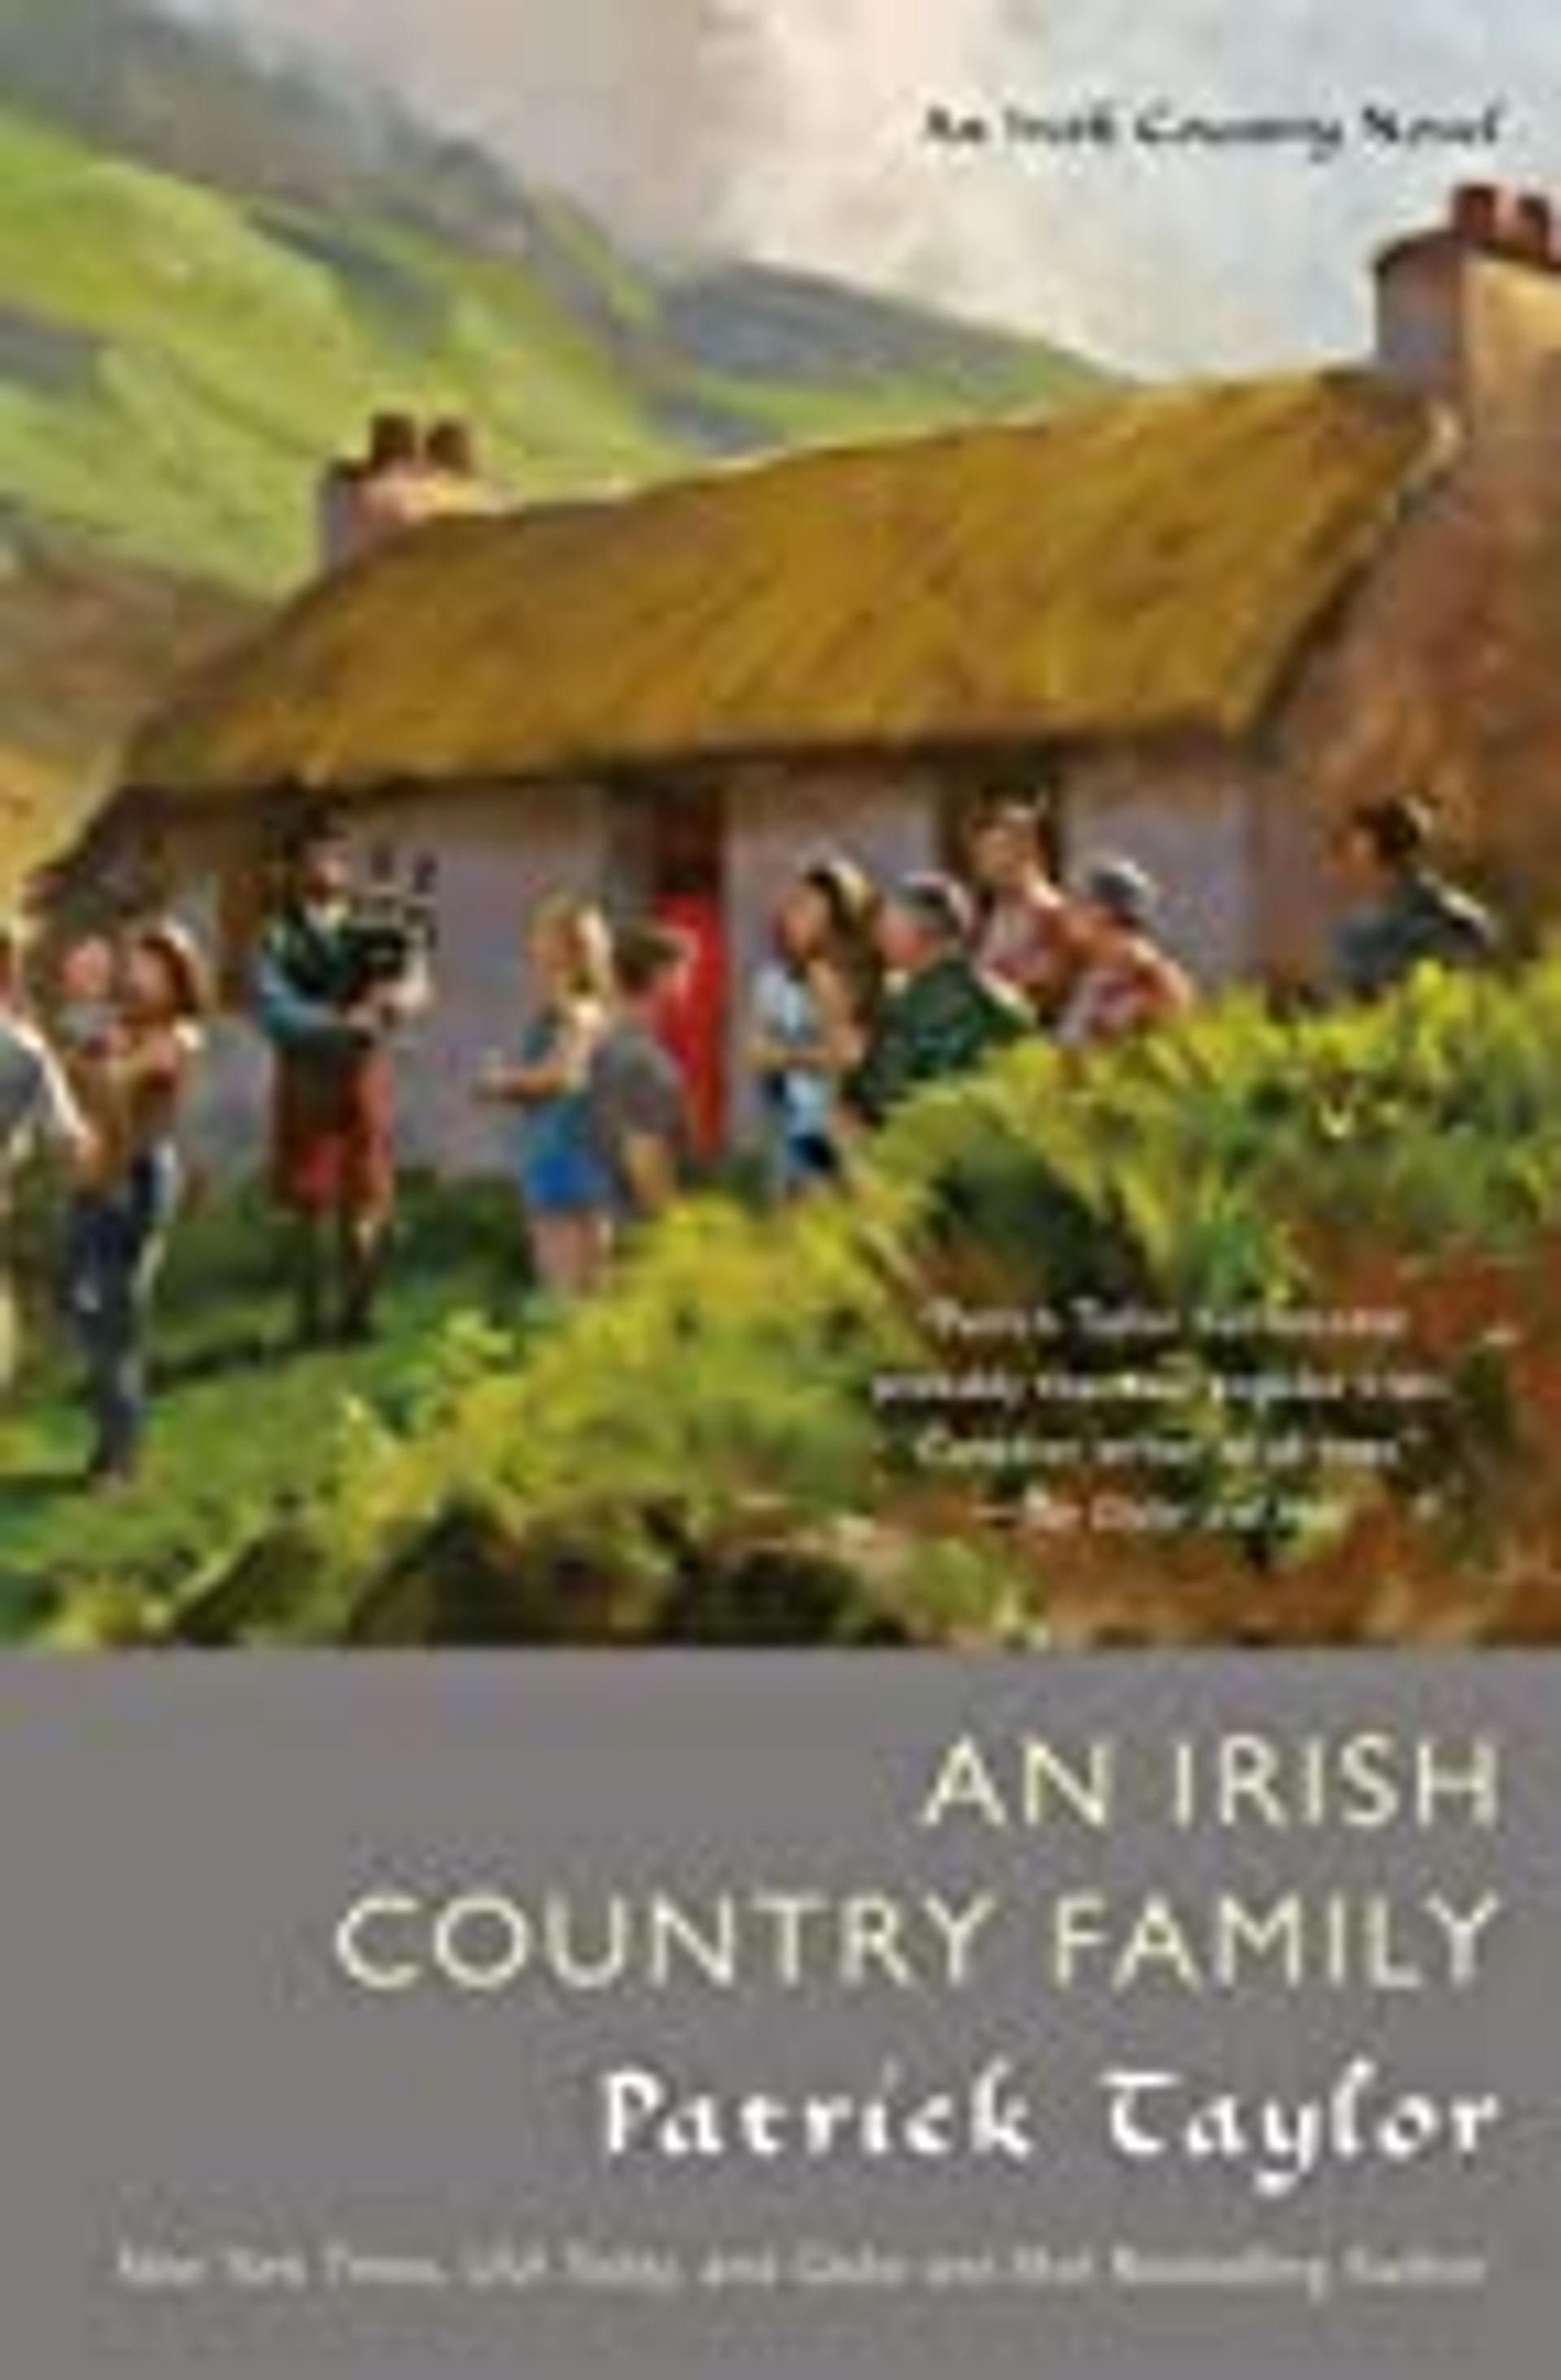 An Irish Country Family by Patrick Taylor